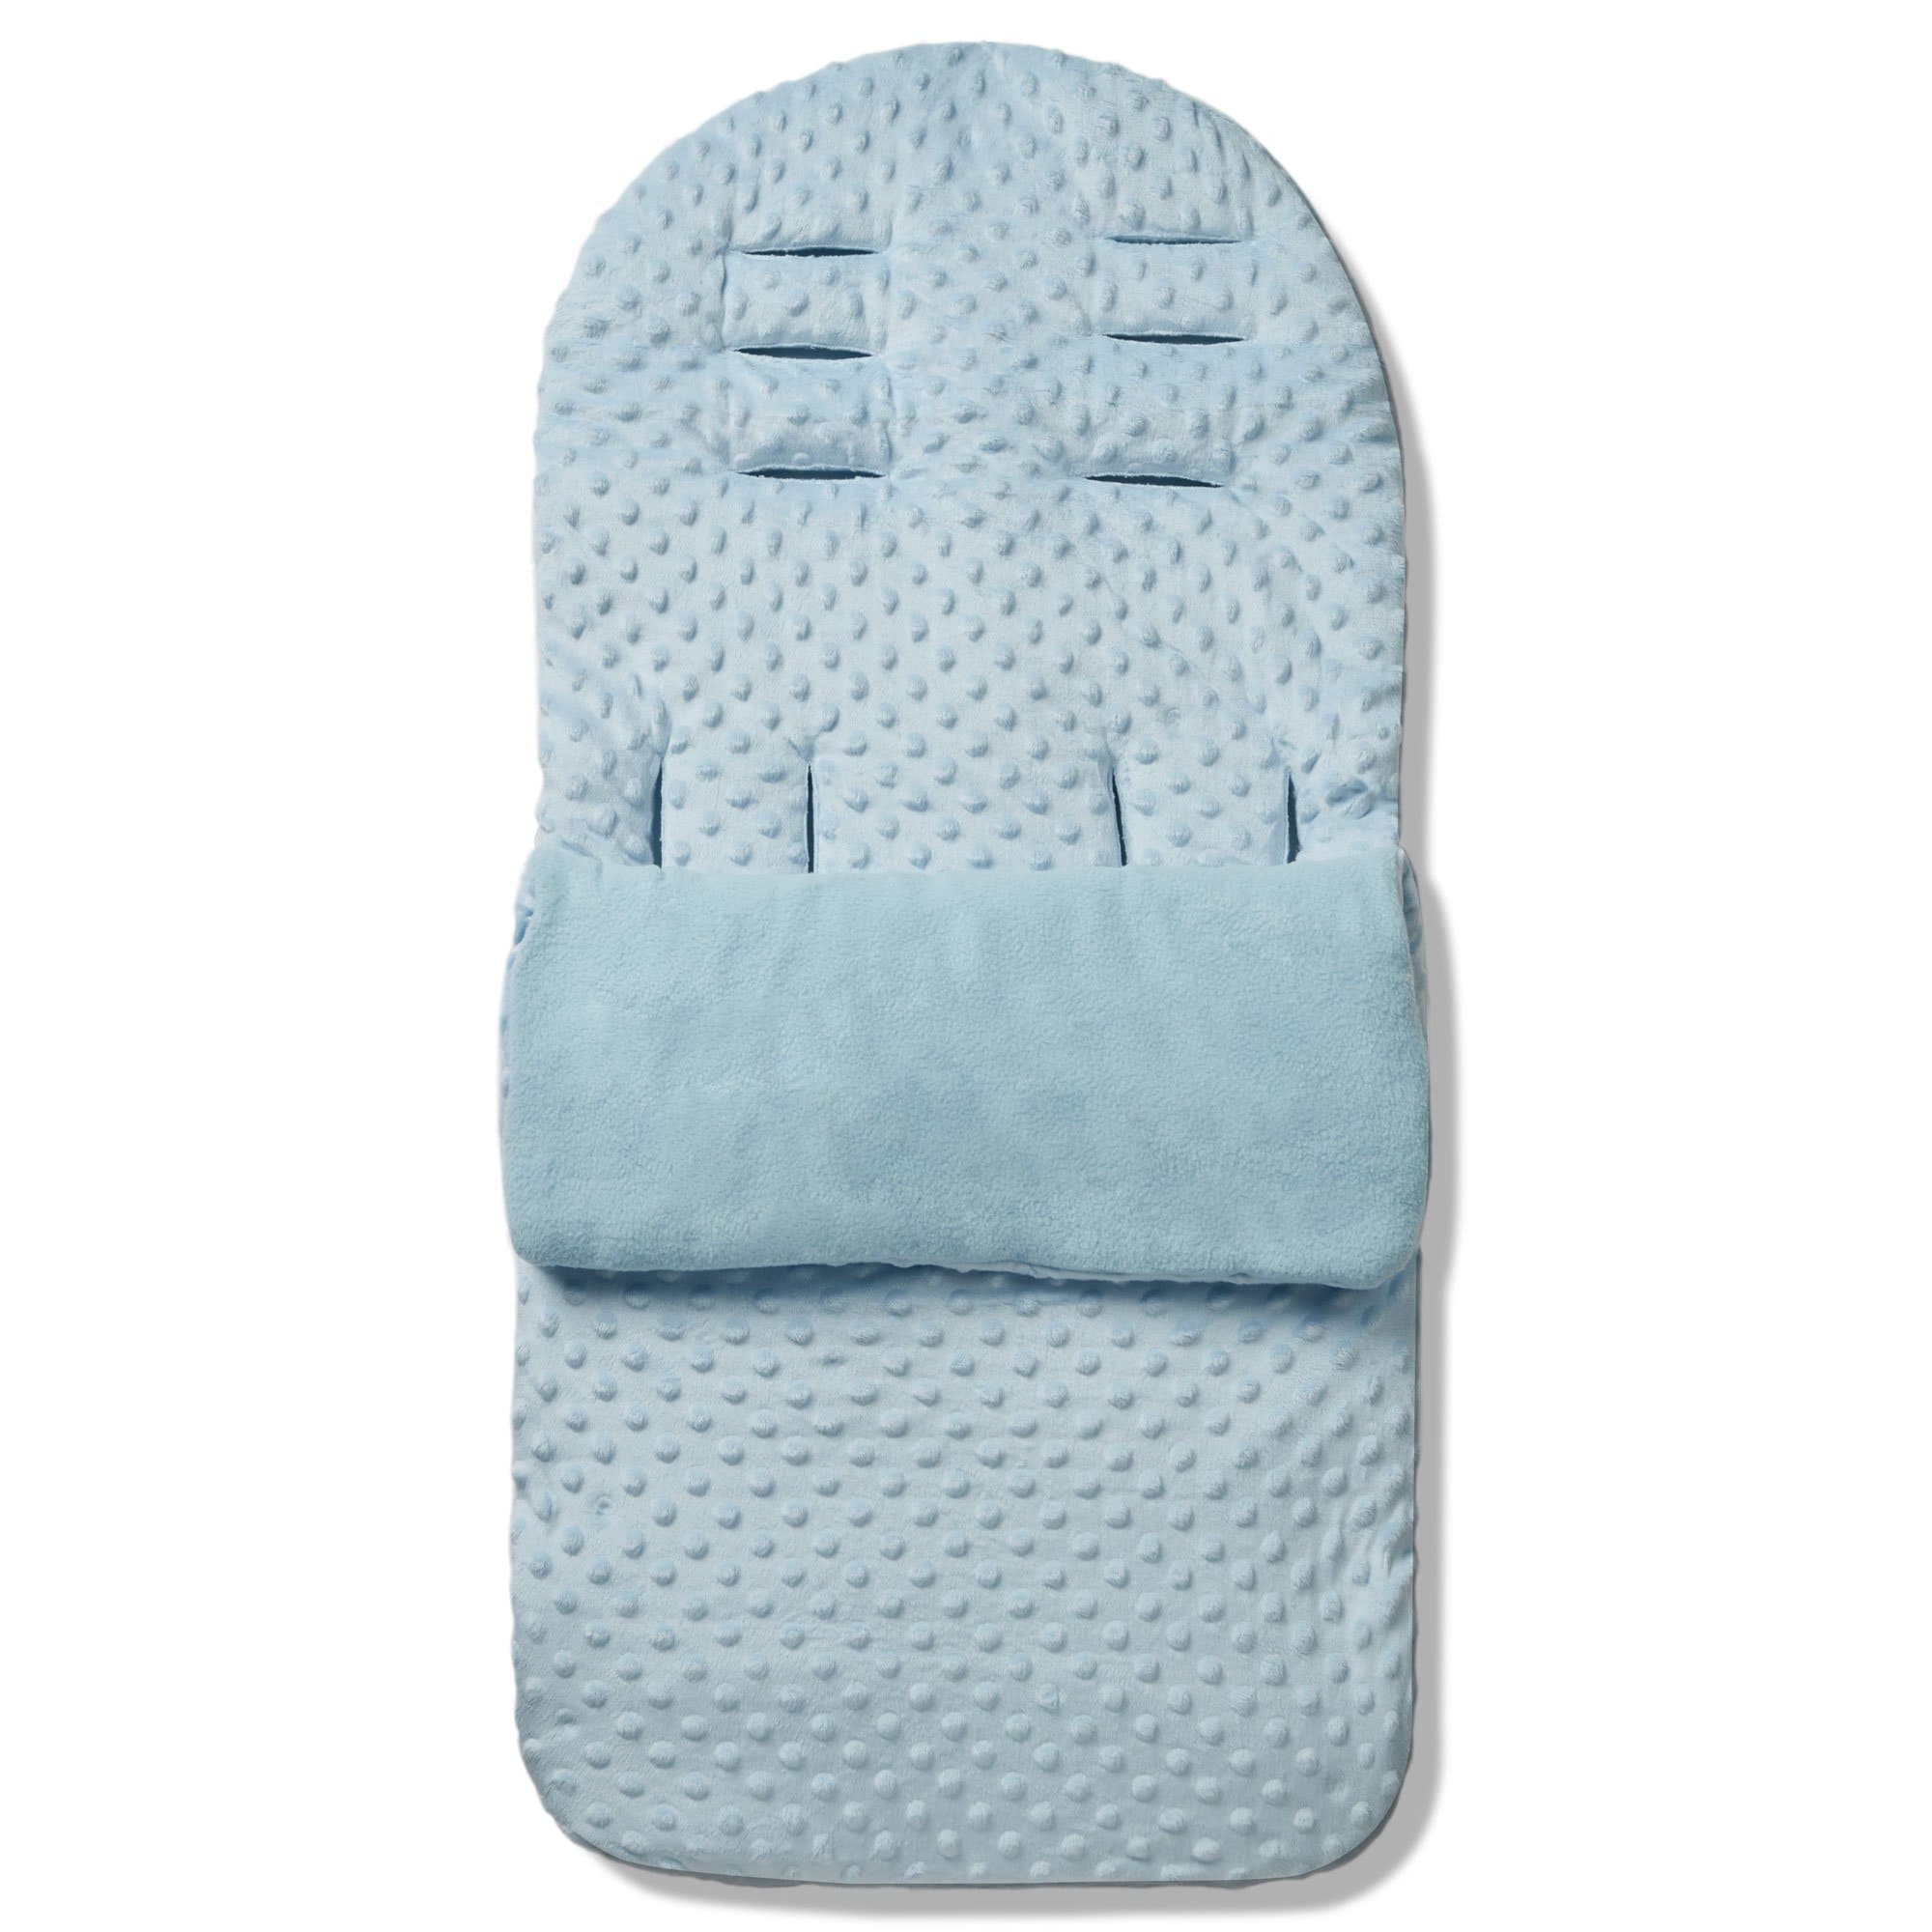 Dimple Footmuff / Cosy Toes Compatible with Casual - For Your Little One